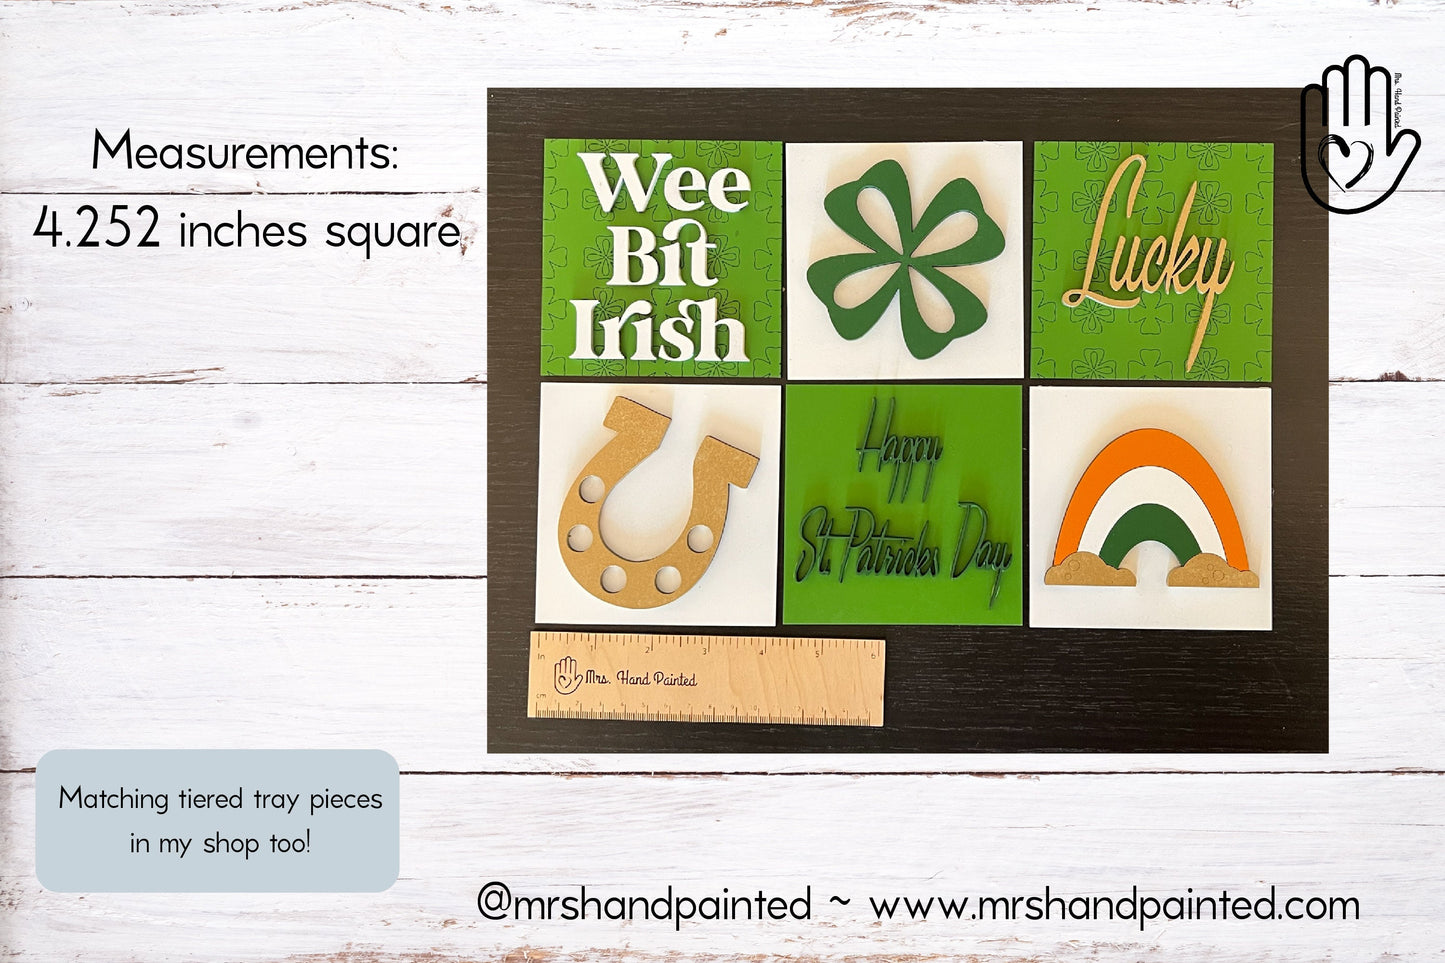 Retro St. Patrick's Day Leaning Ladder Interchangeable Signs - Laser Cut Wood Painted